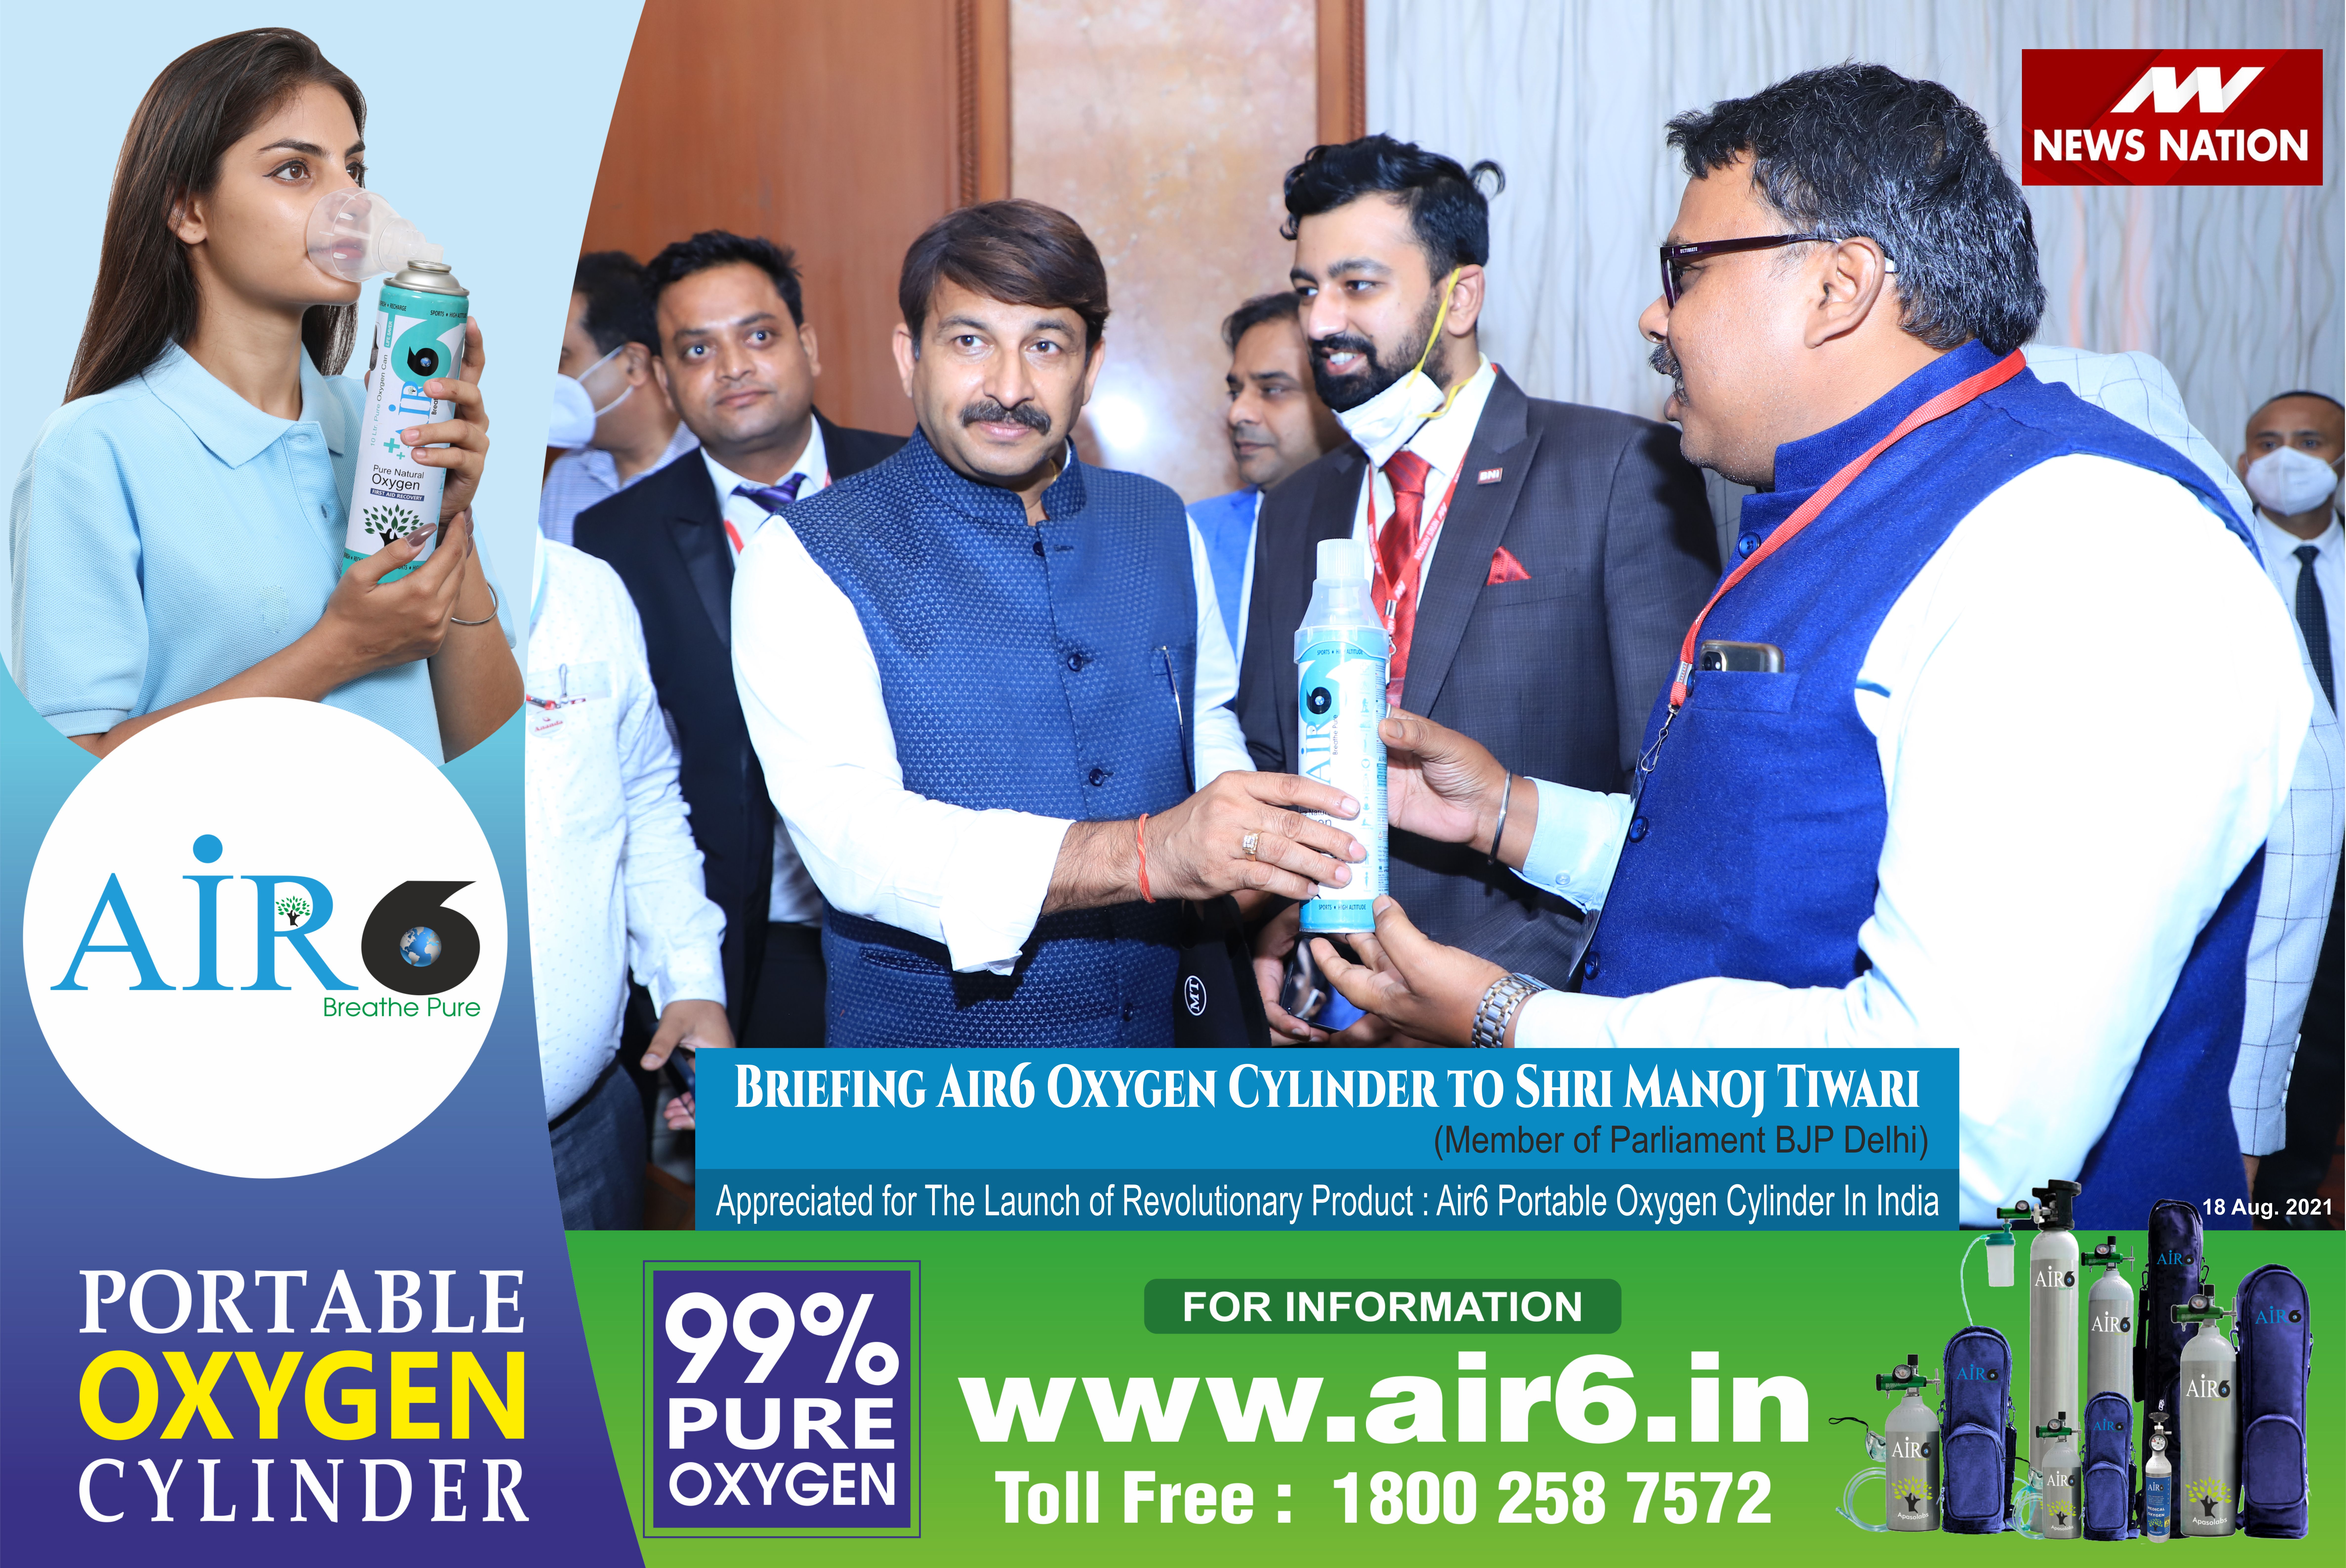 with Sri Manoj Tiwari ( MP Delhi) during a program organized by News Nation.He much appreciated the  revolutionary product Air6 Portable oxygen Cylinder